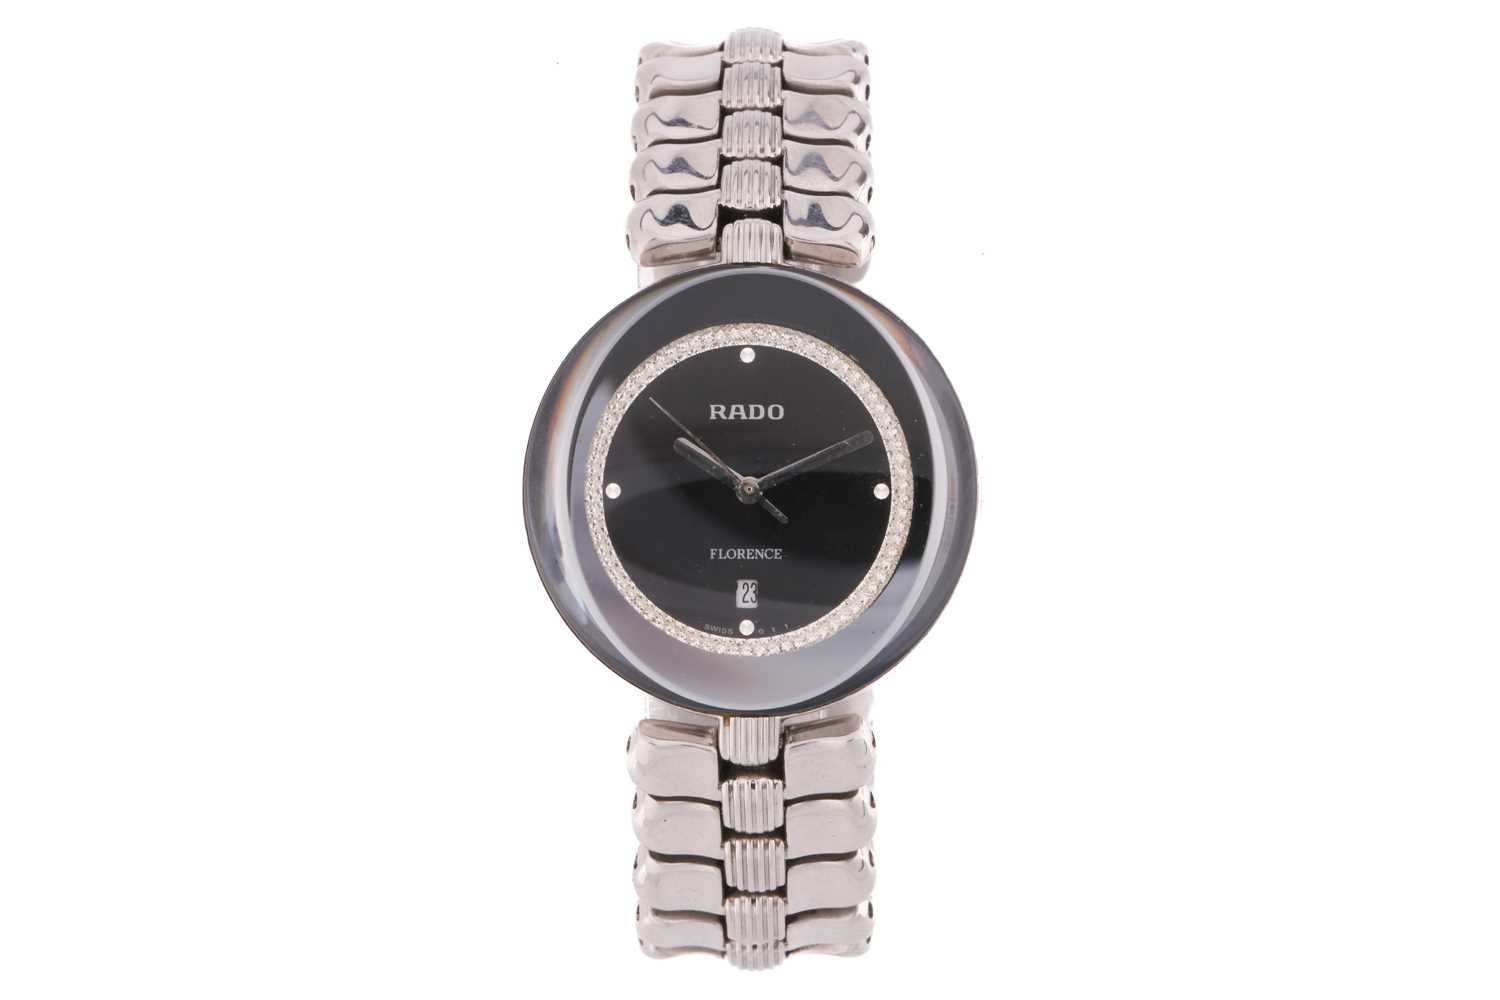 A Rado Florence lady's wrist watch, featuring a swiss made quartz movement in a steel case measuring